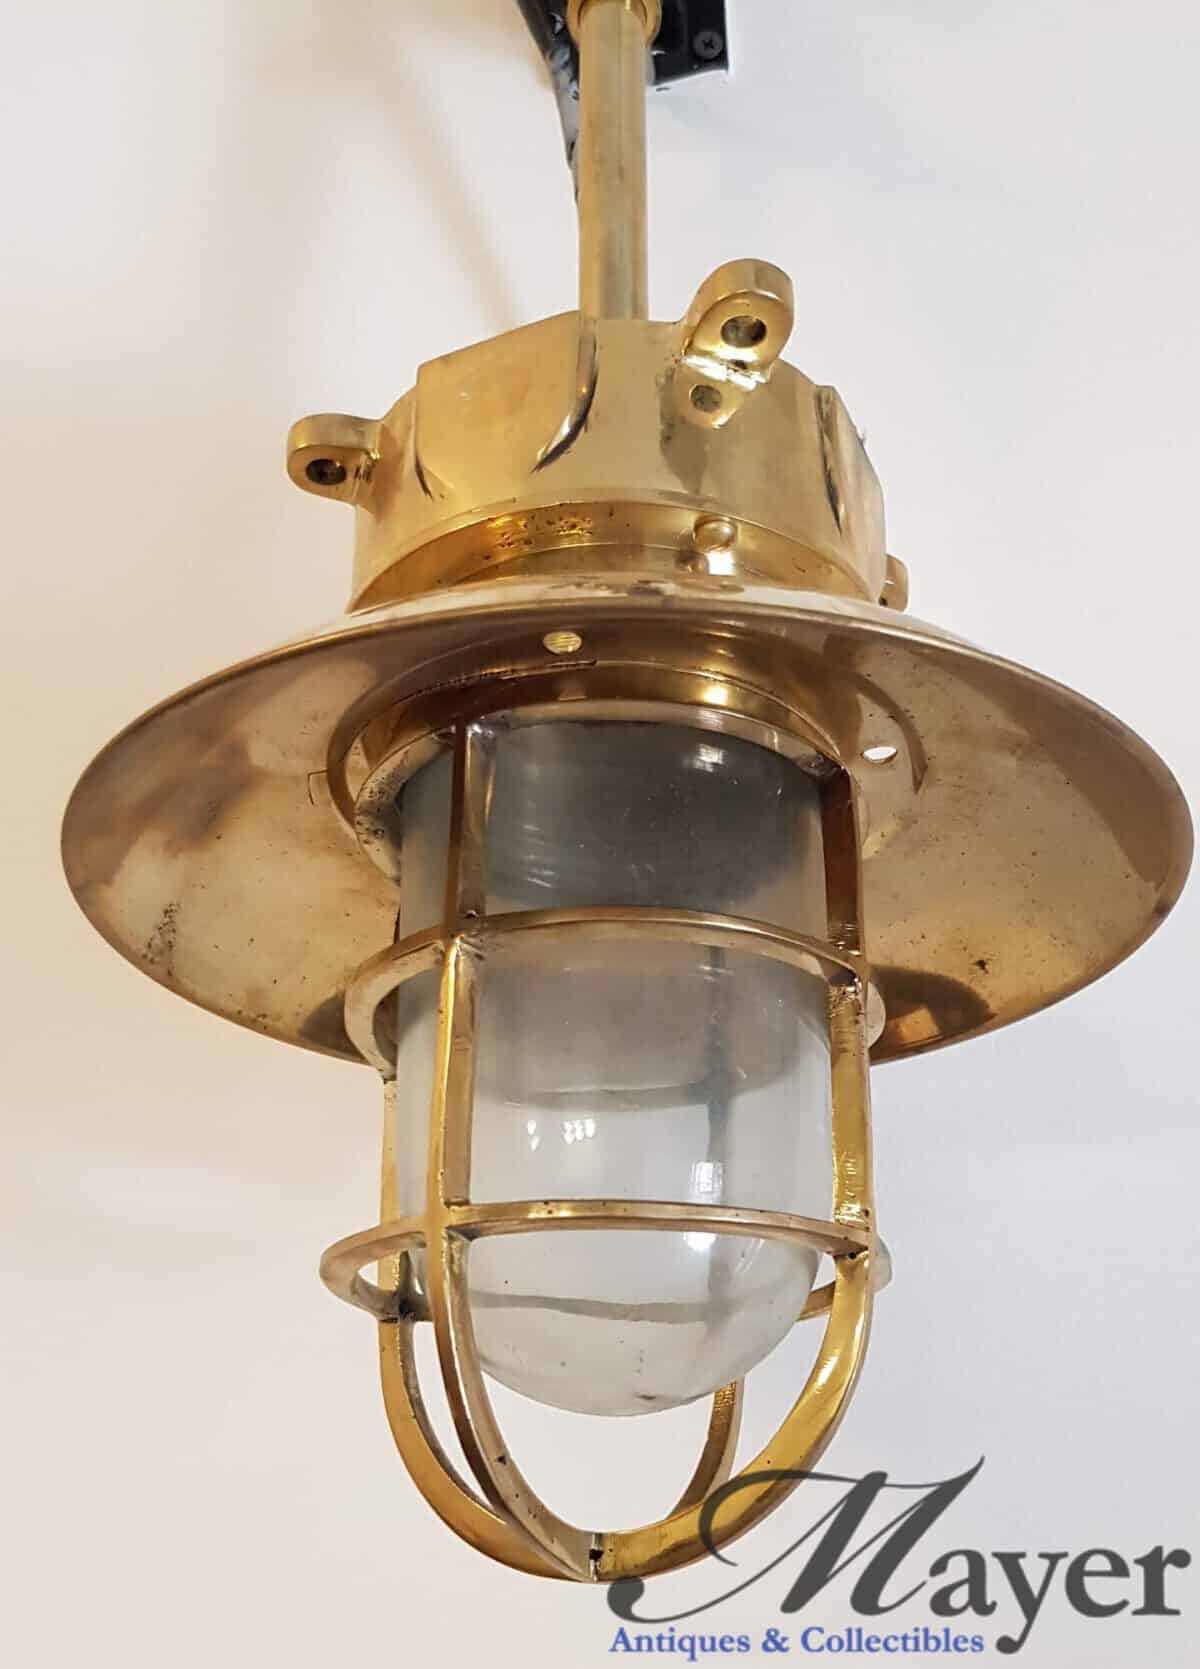 Hanging Nautical Brass Lamp From Rod